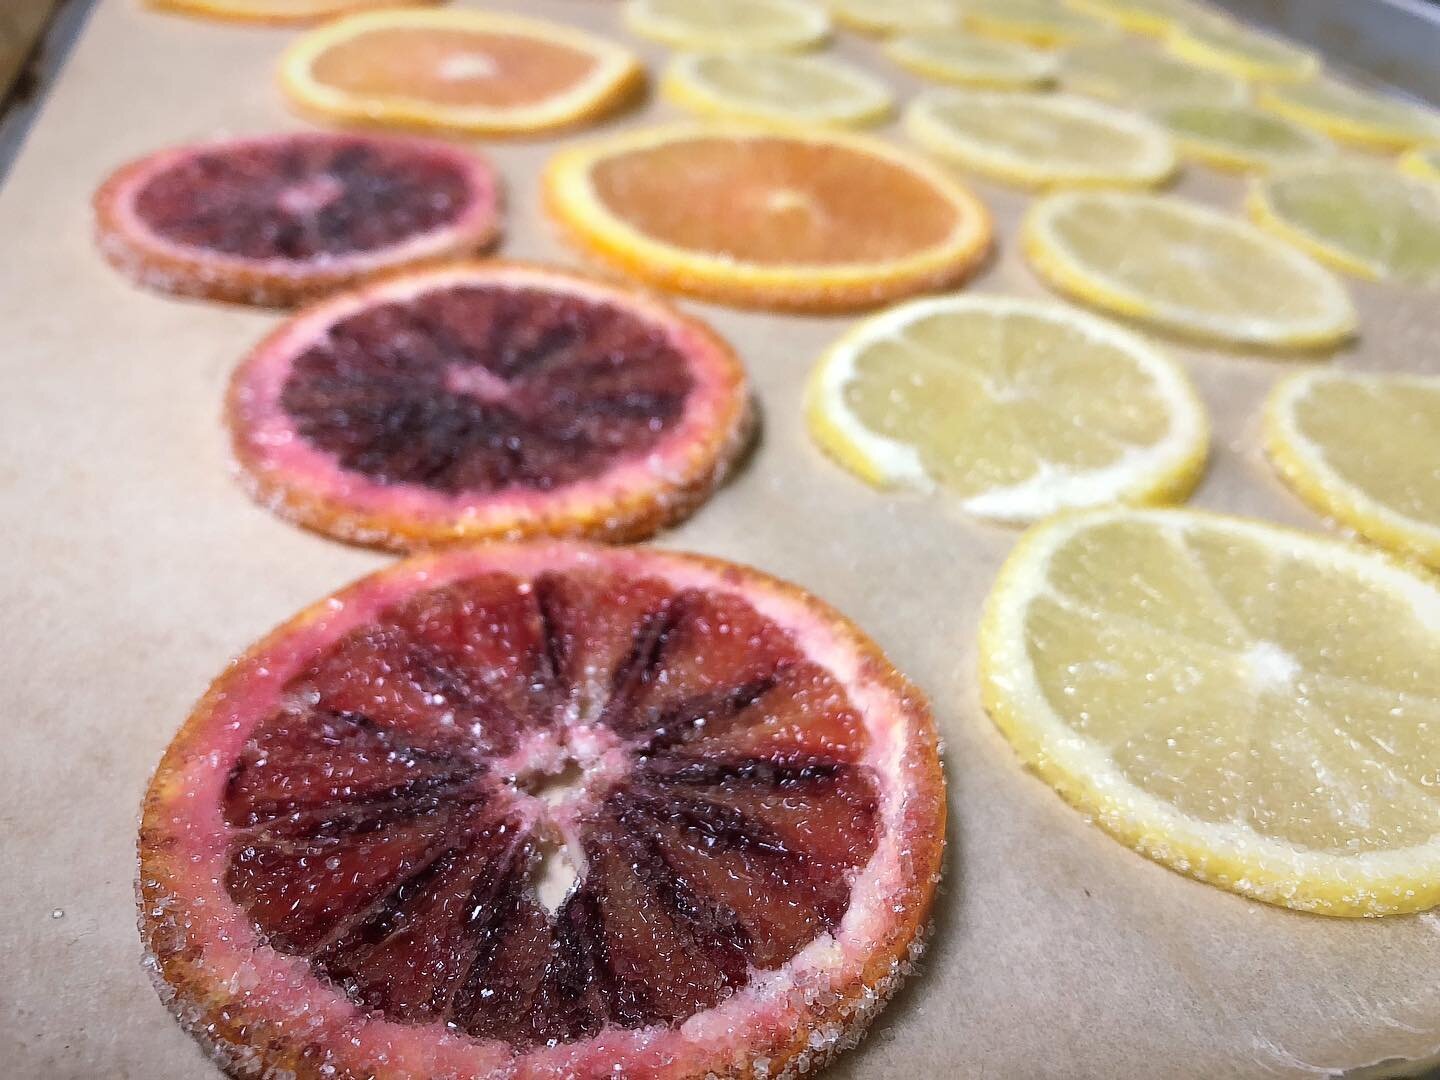 Candied citrus in the works.
 

#citrus #candied #bloodorange #lemon #cutie #momchef #privatechef #bakerlife